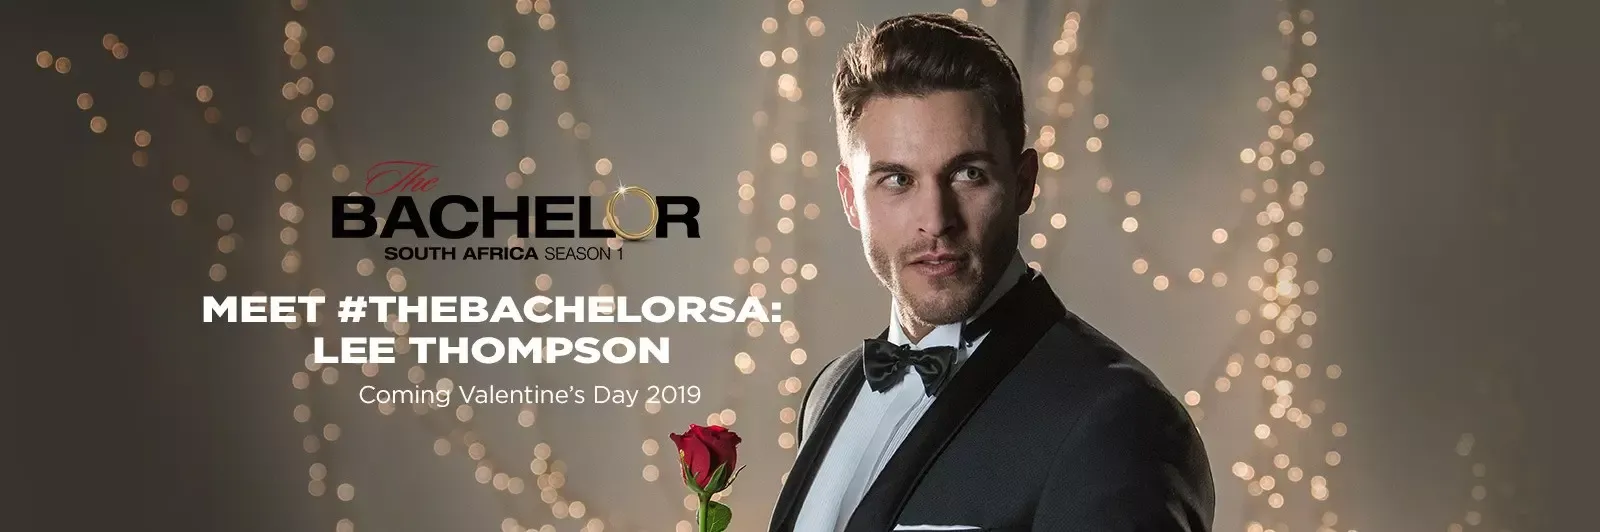 Bachelor South Africa - Lee Thompson - Season 1 - Media SM - *Sleuthing Spoilers* 1538985735-27_The_Bachelor_Article_